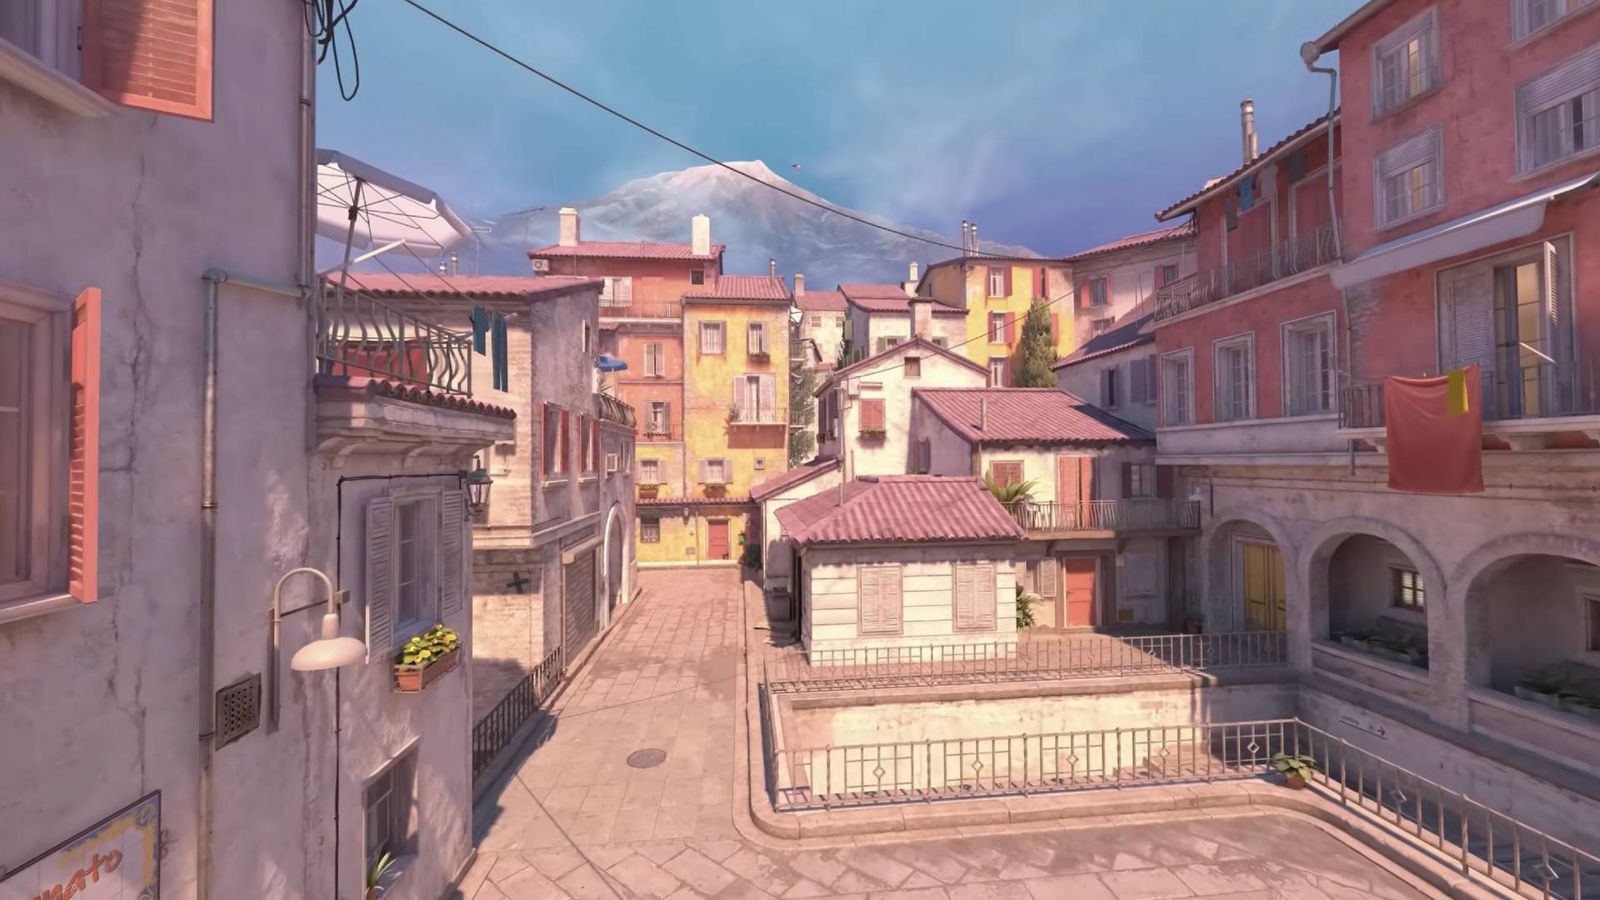 A landscape of terraced apartments in Counter Strike 2.